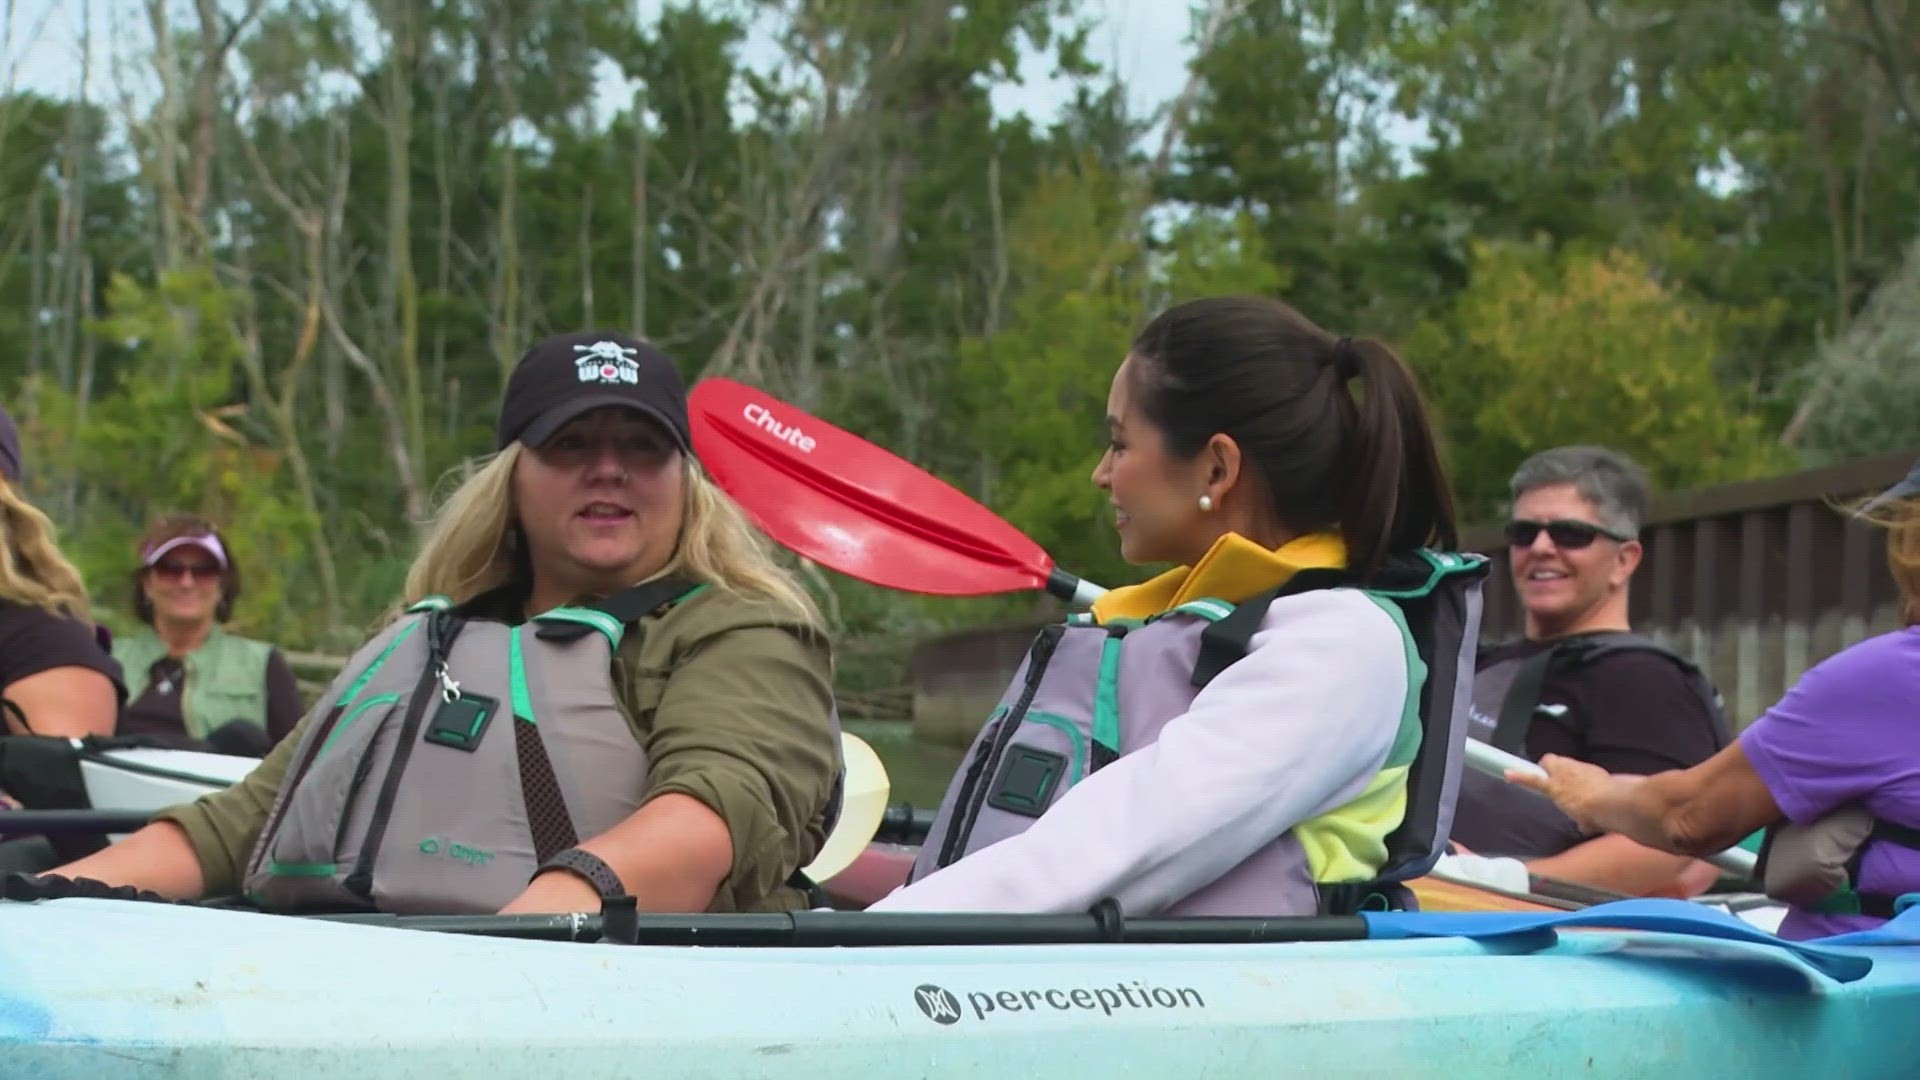 The Facebook group, which has more than 7,000 members, brings together women from across the state to participate in activities from kayaking to concerts.